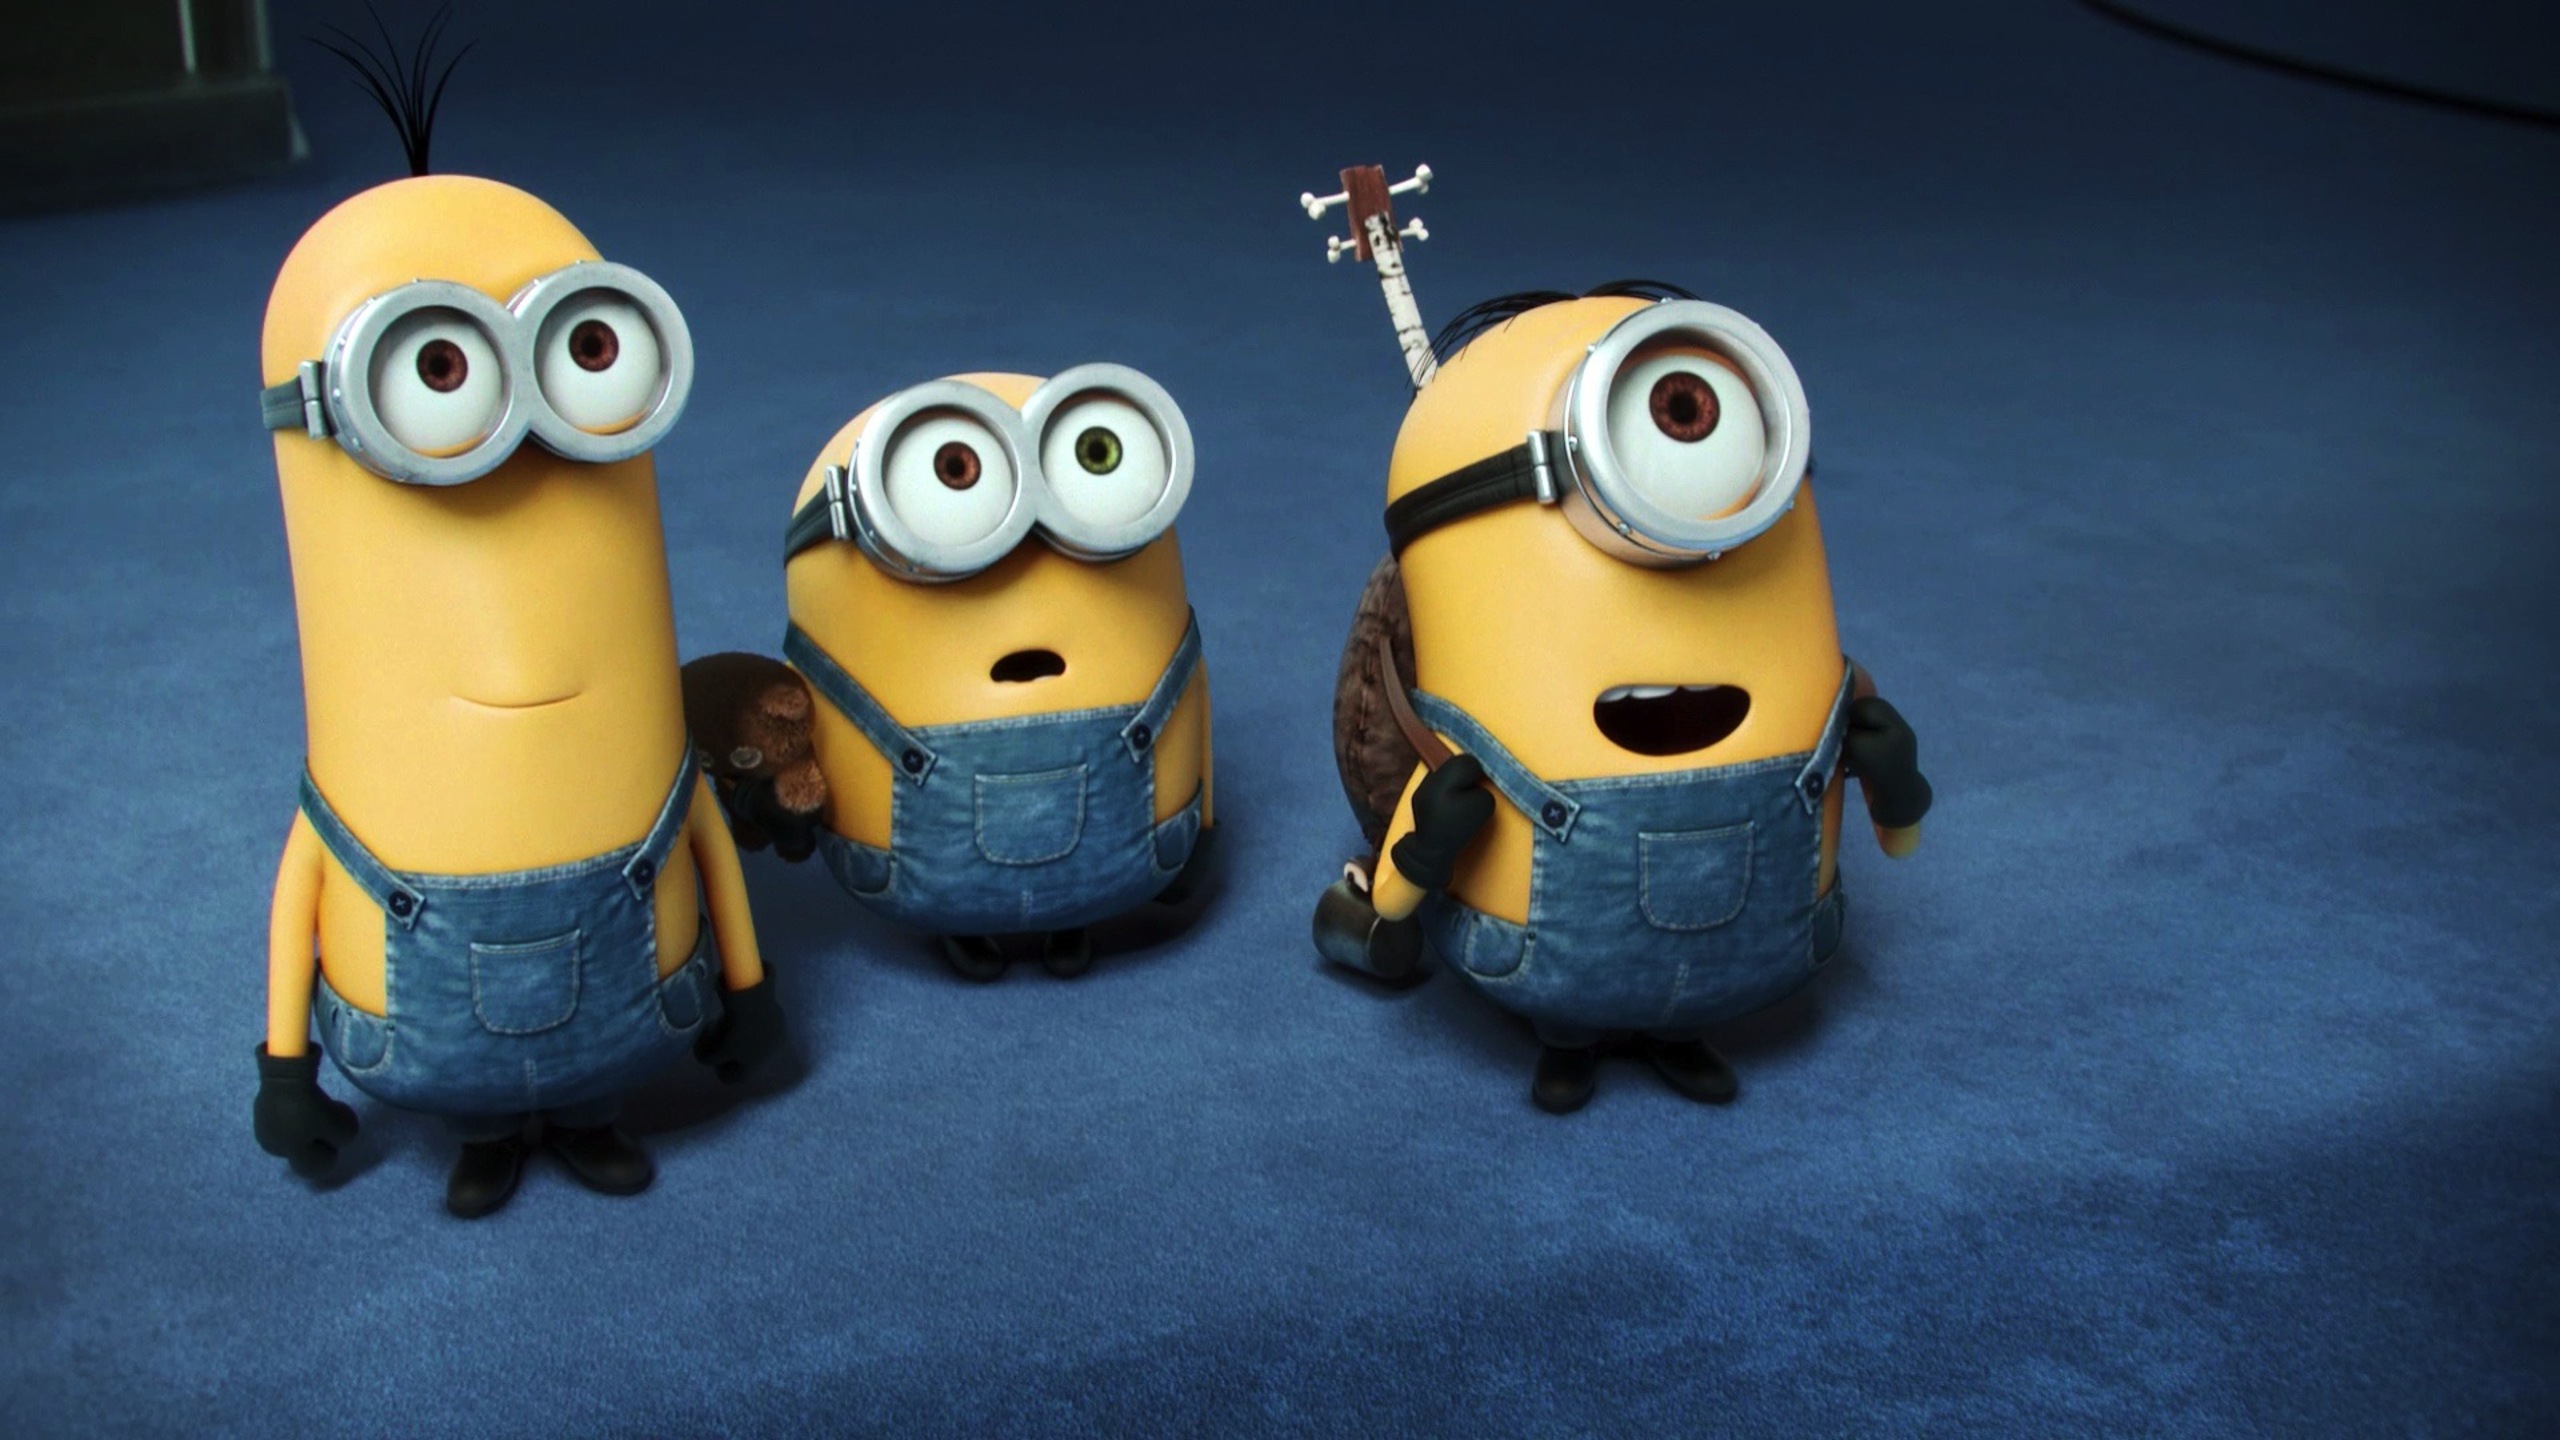 2560x1440 Kevin Bob Minions 1440p Resolution Hd 4k Wallpapers Images Backgrounds Photos And